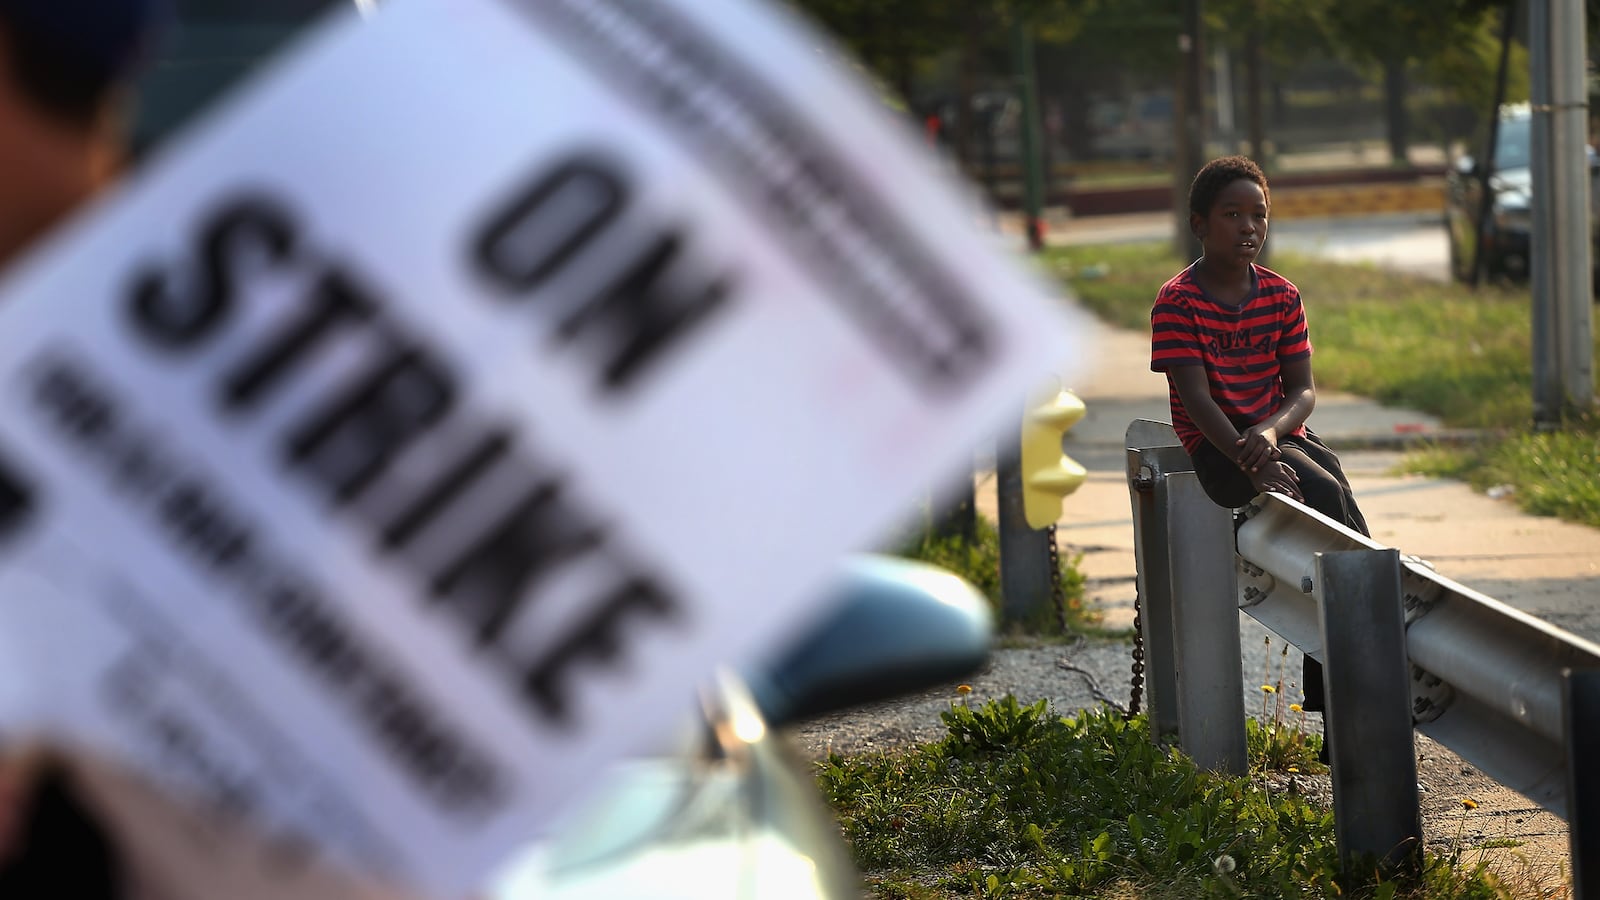 A third grader watches Chicago teachers as they picket outside his school in the fall of 2012.